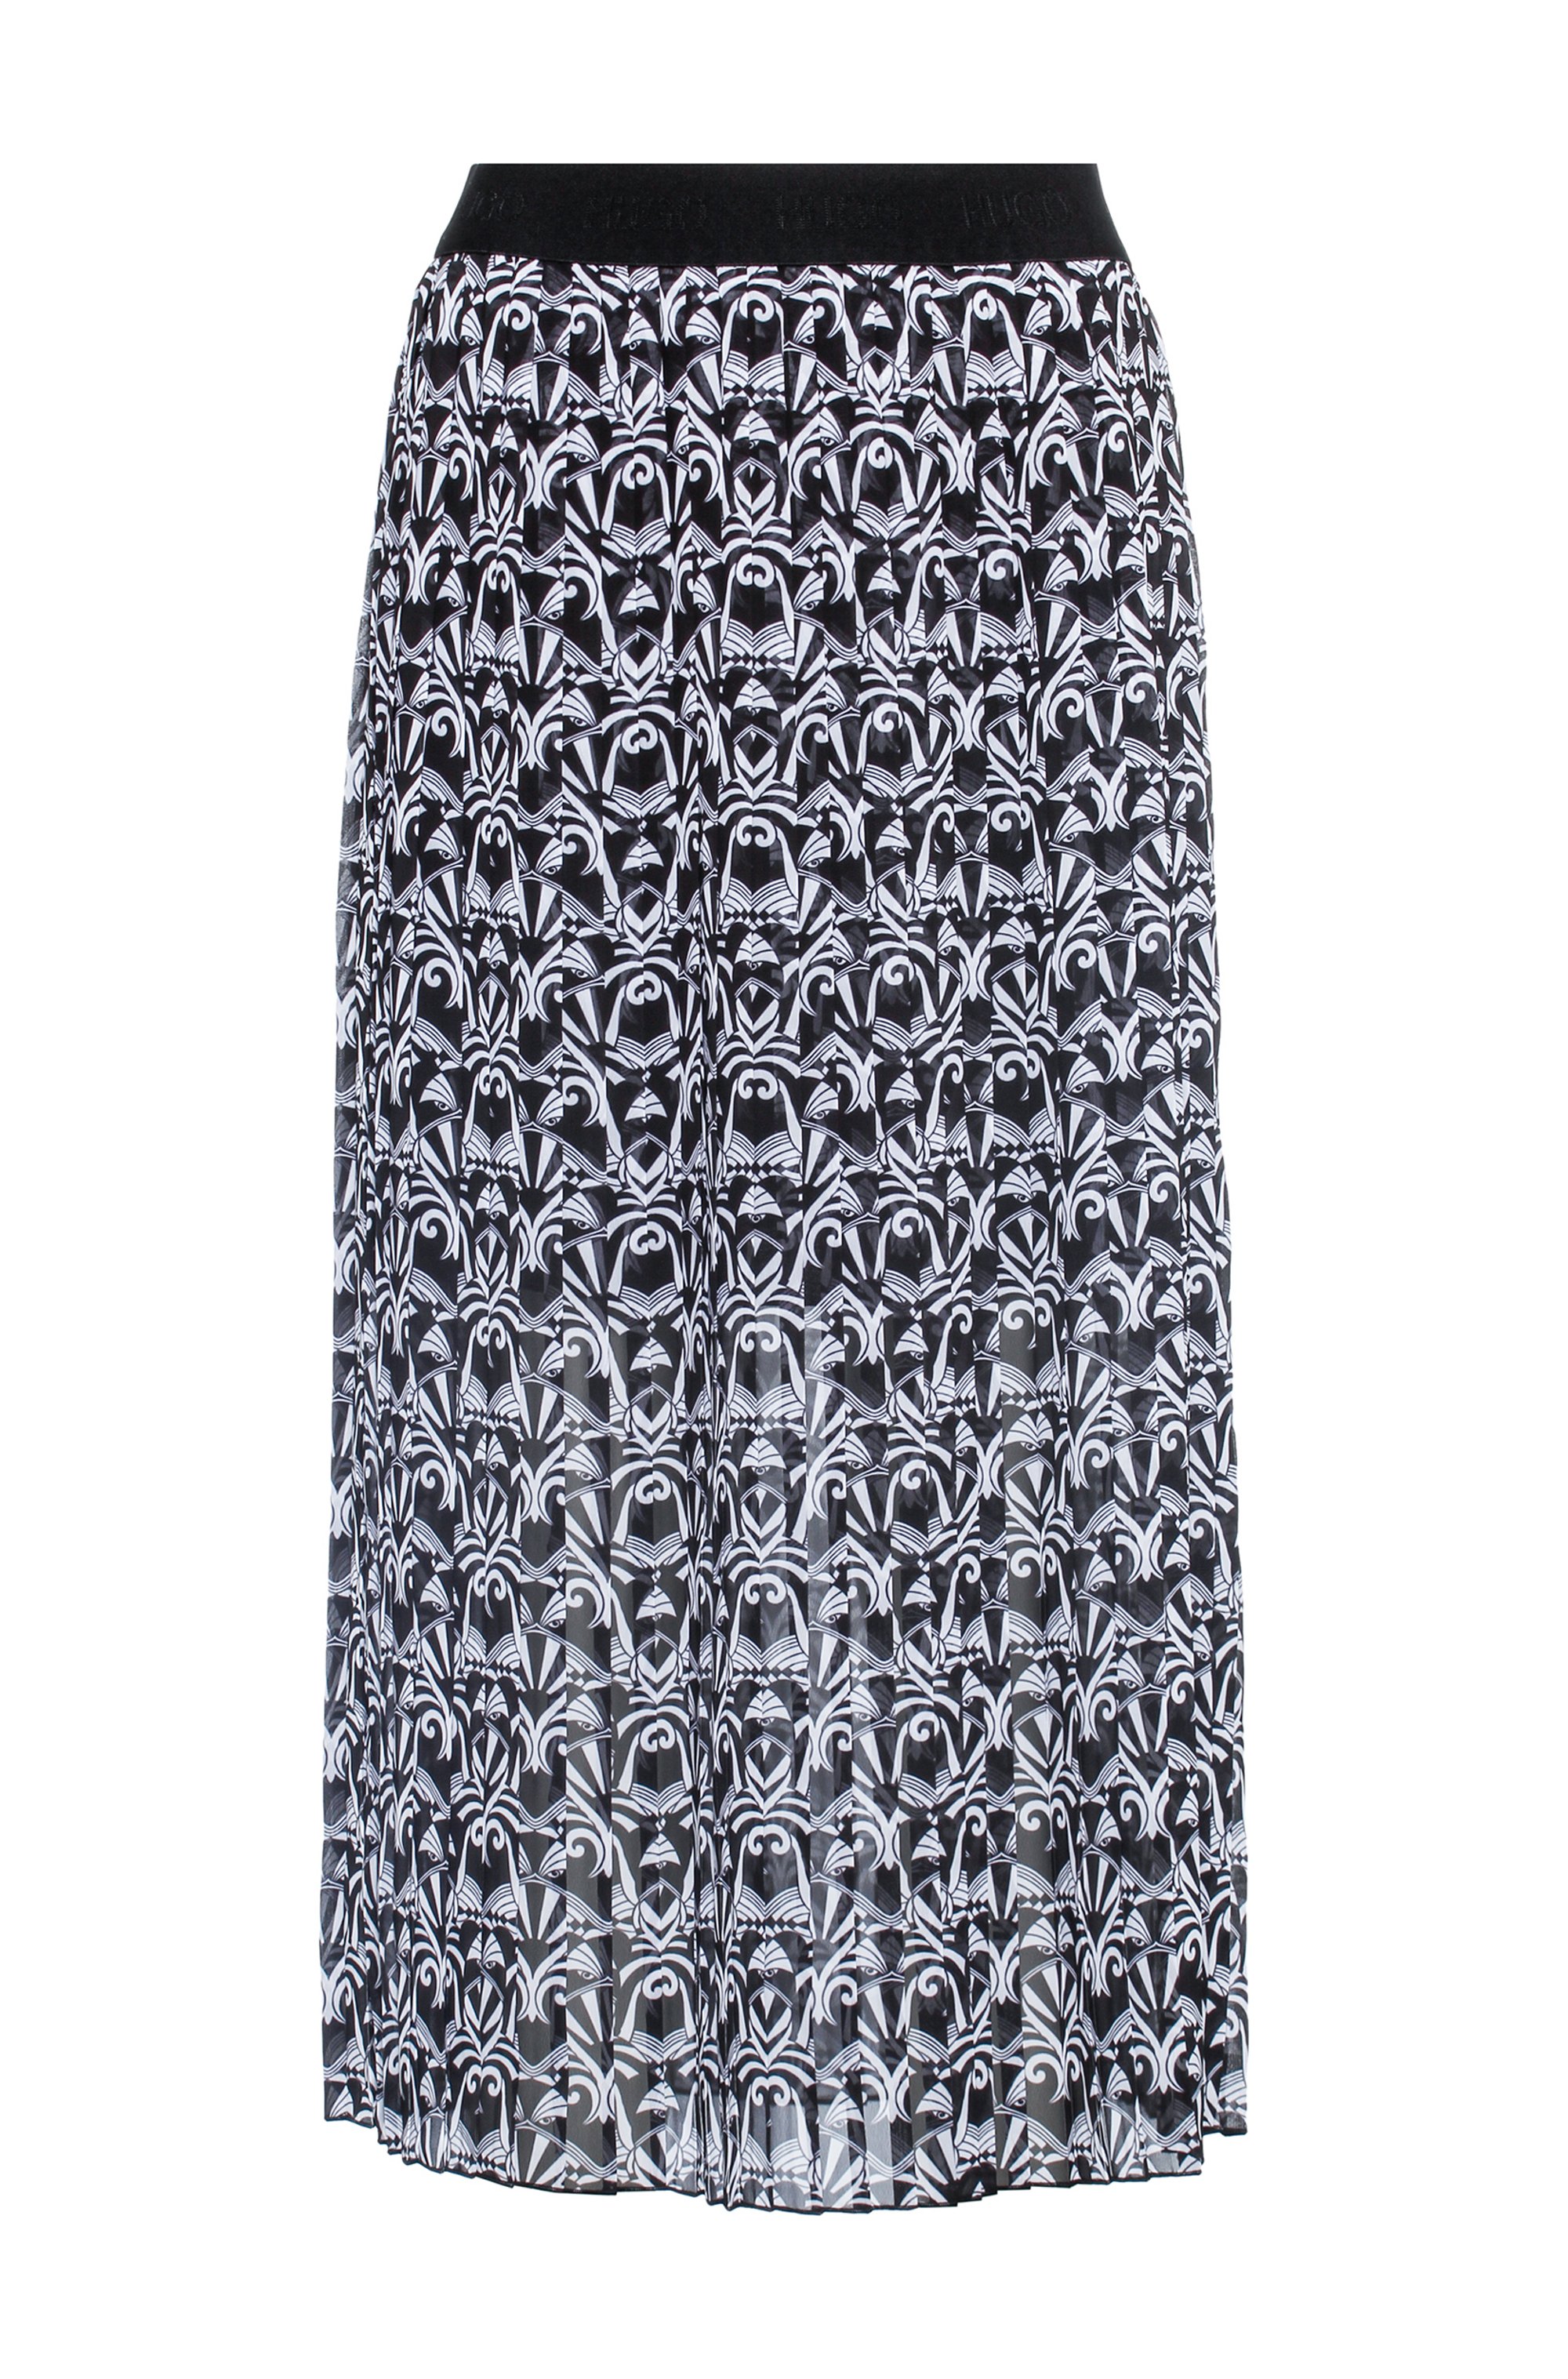 Plissé midi skirt in recycled fabric with bear print, Patterned